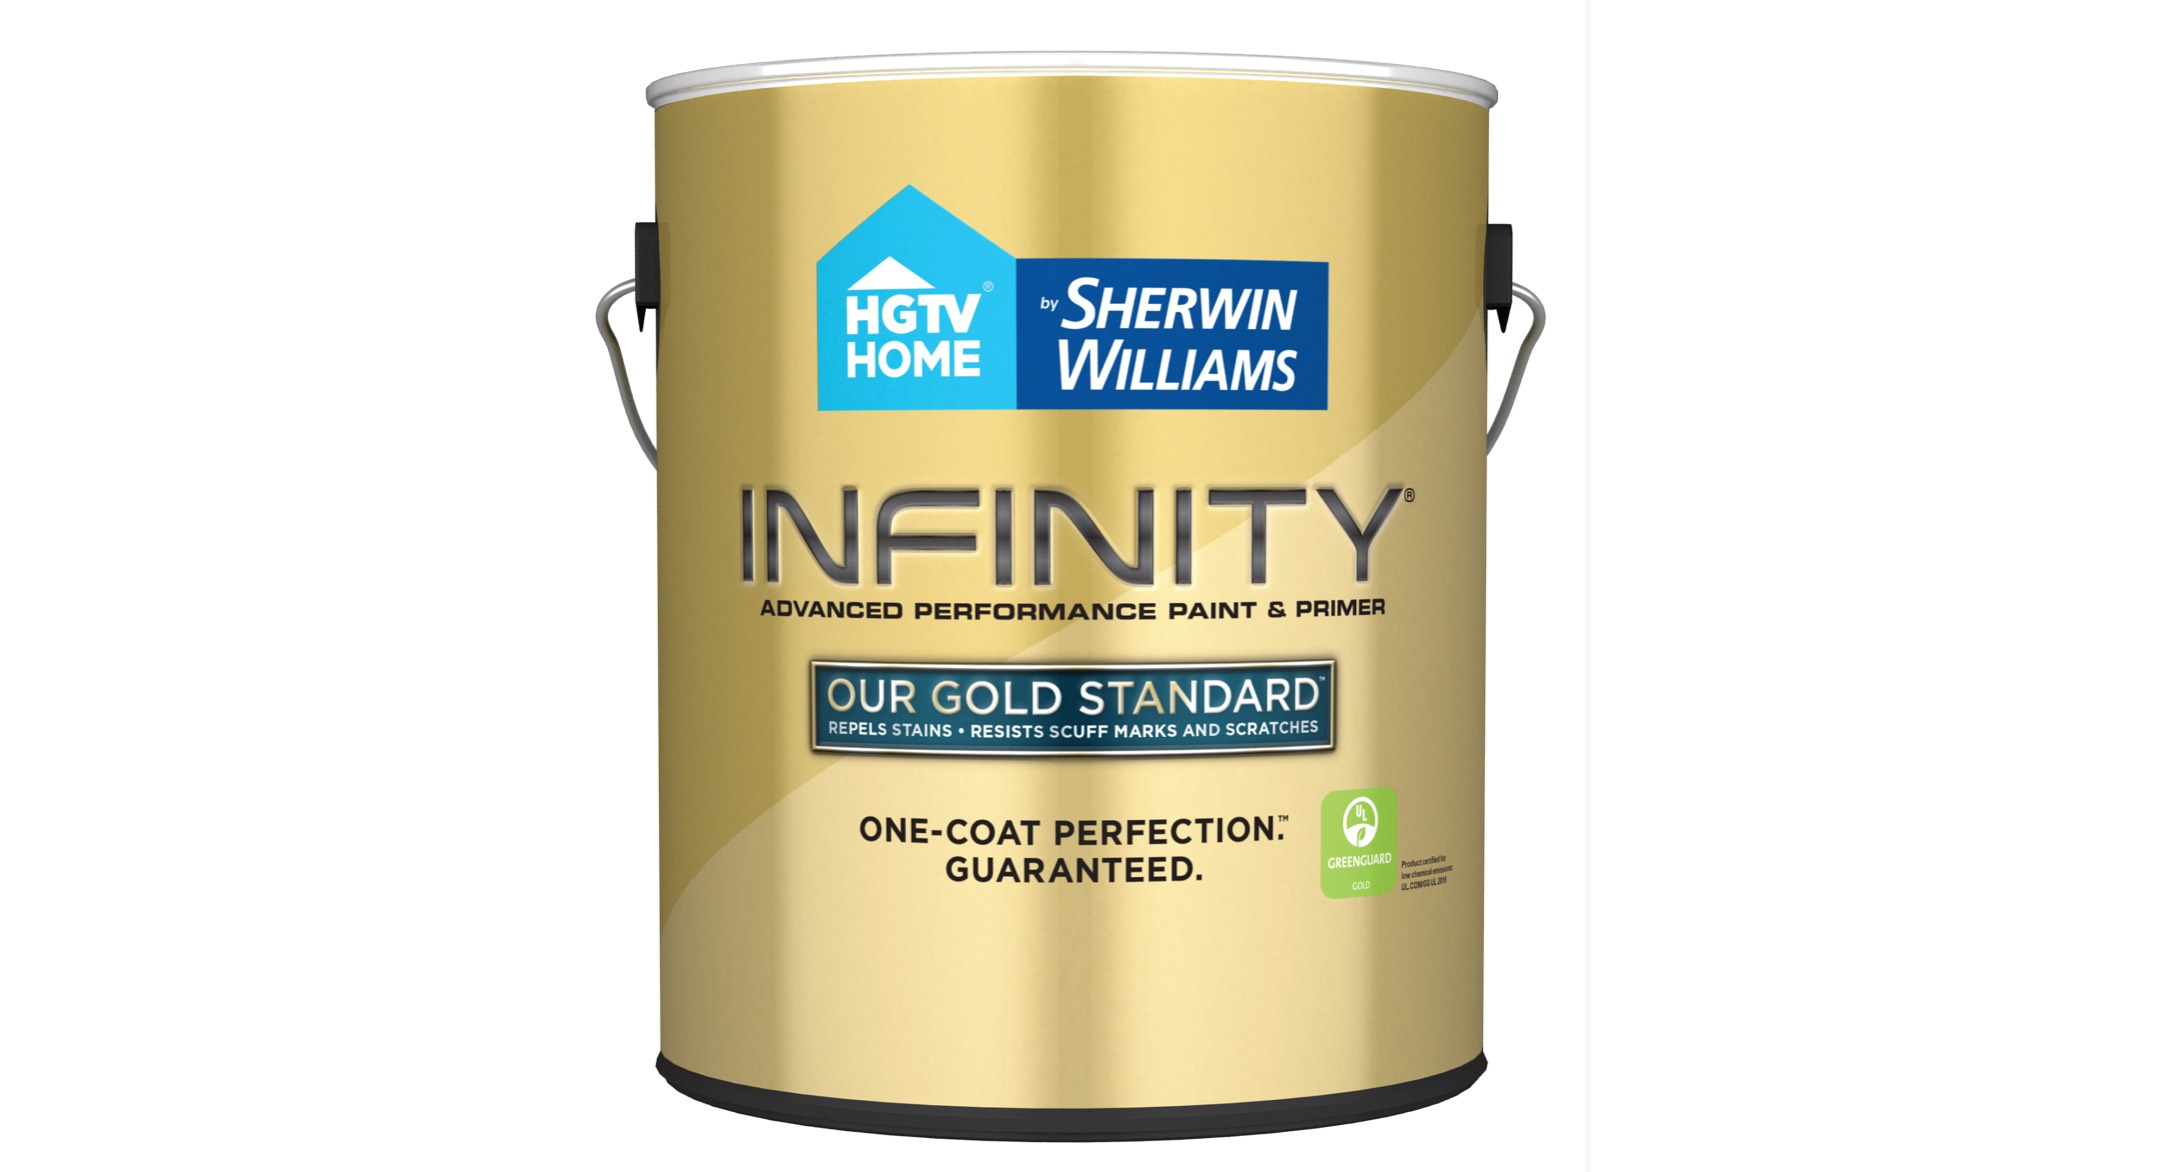 HGTV Home by Sherwin-Williams Introduces New-and-Improved Paint Products